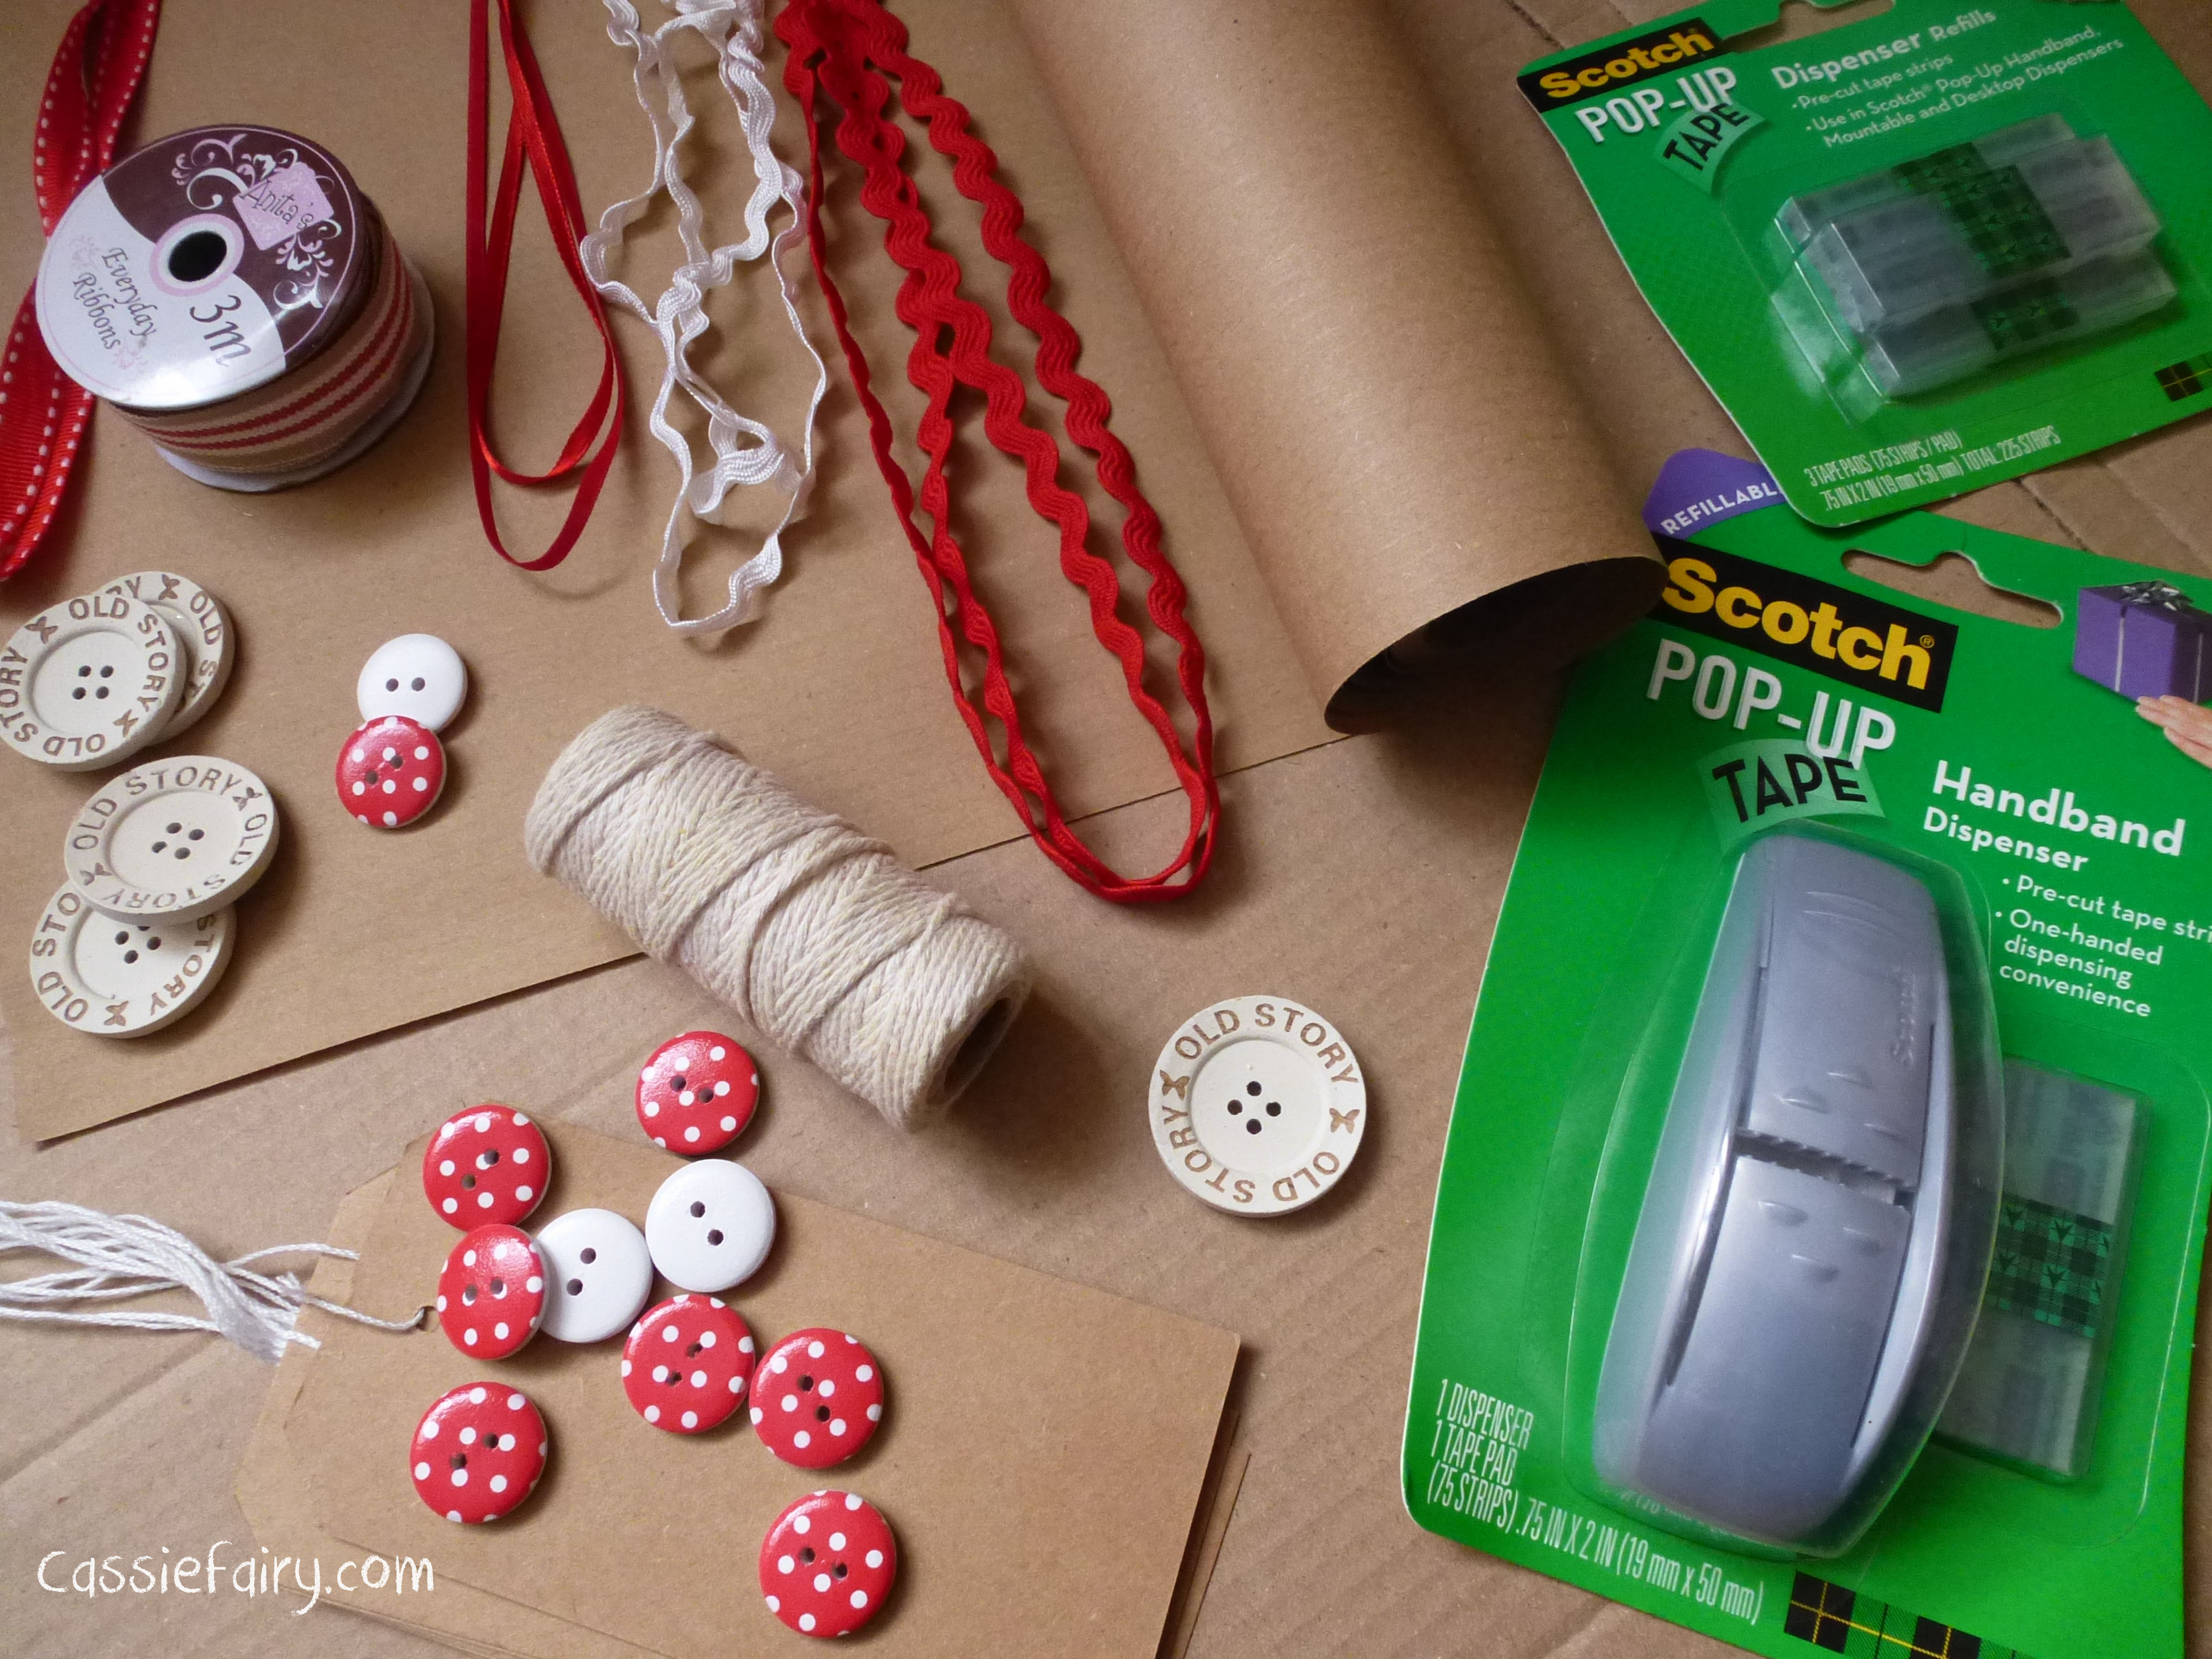 Gift Wrapping Concept Wrapping Paper Rope Tape And Scissors On